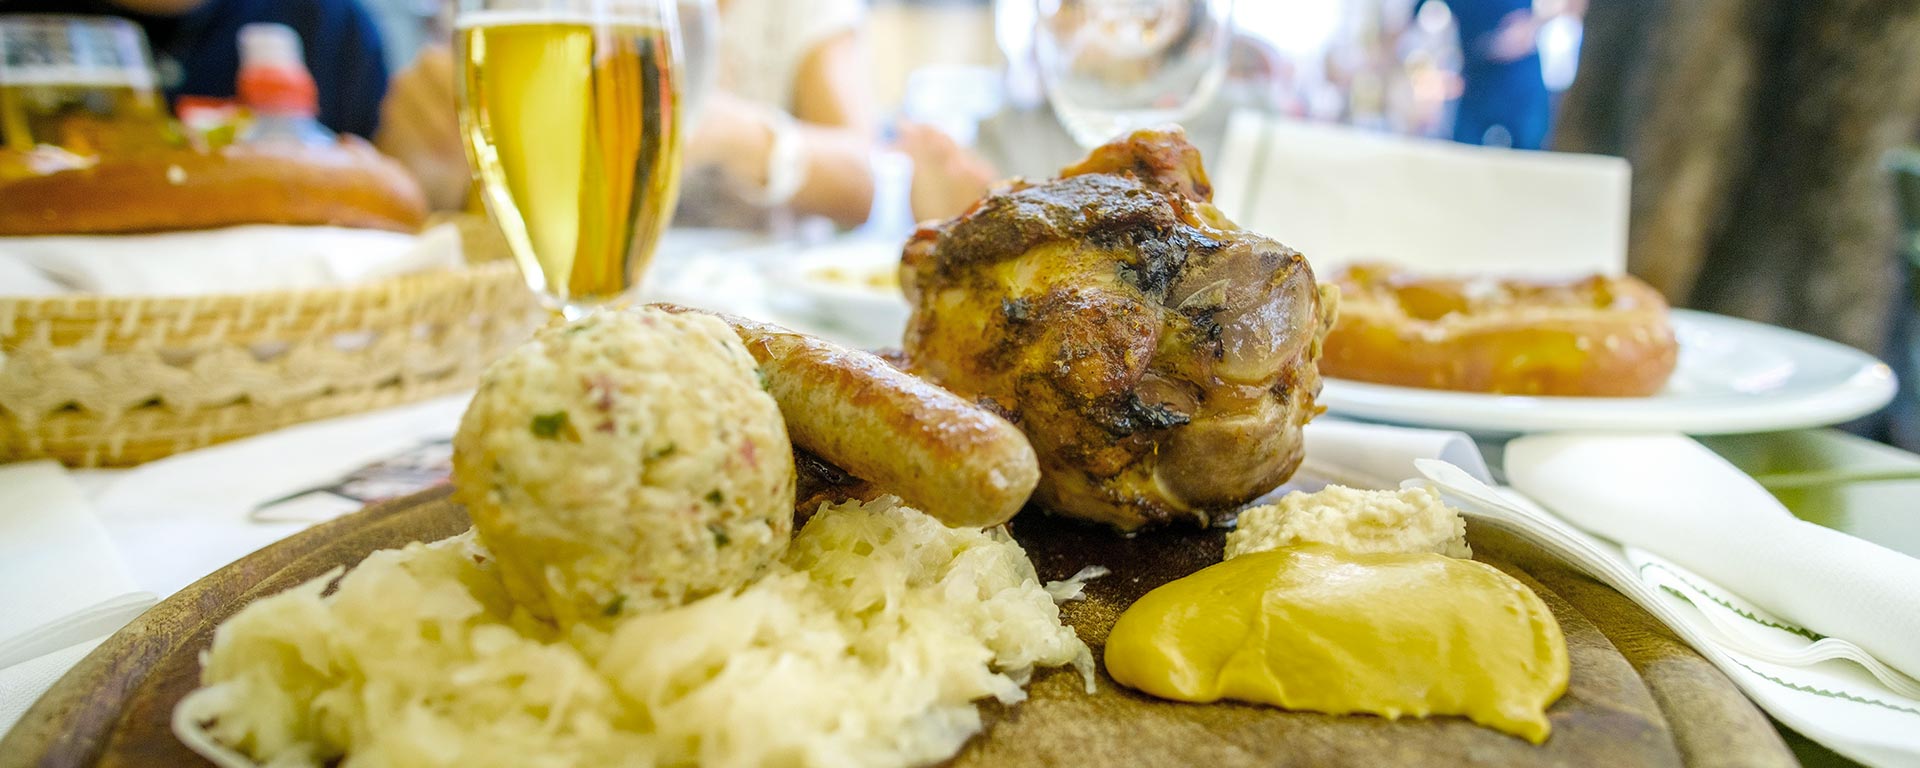 a combination of typical south tyrolean delicacies: Knödel, Würstel, and sauerkraut